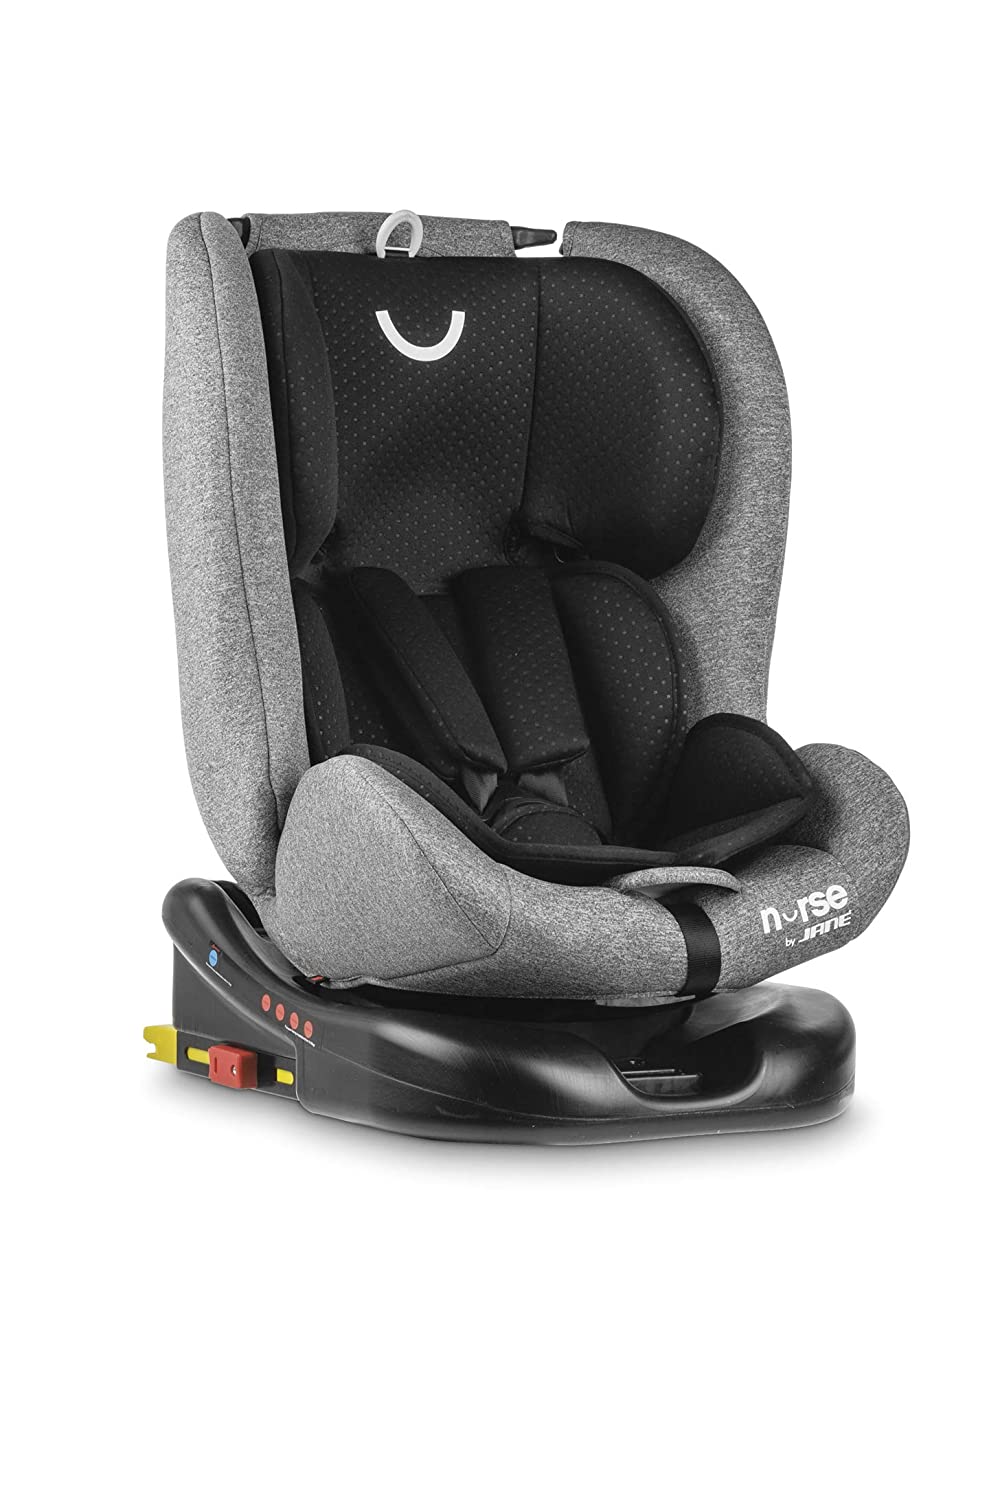 Nurse by Jané 7016 Y57 Roll 360 Degree Child Seat Group 0 1 2 3 from 0 to 36 kg 360 Degree Rotation Isofix and Top Tether Maximum Reclining with Seat Reducer Black 9.5 kg